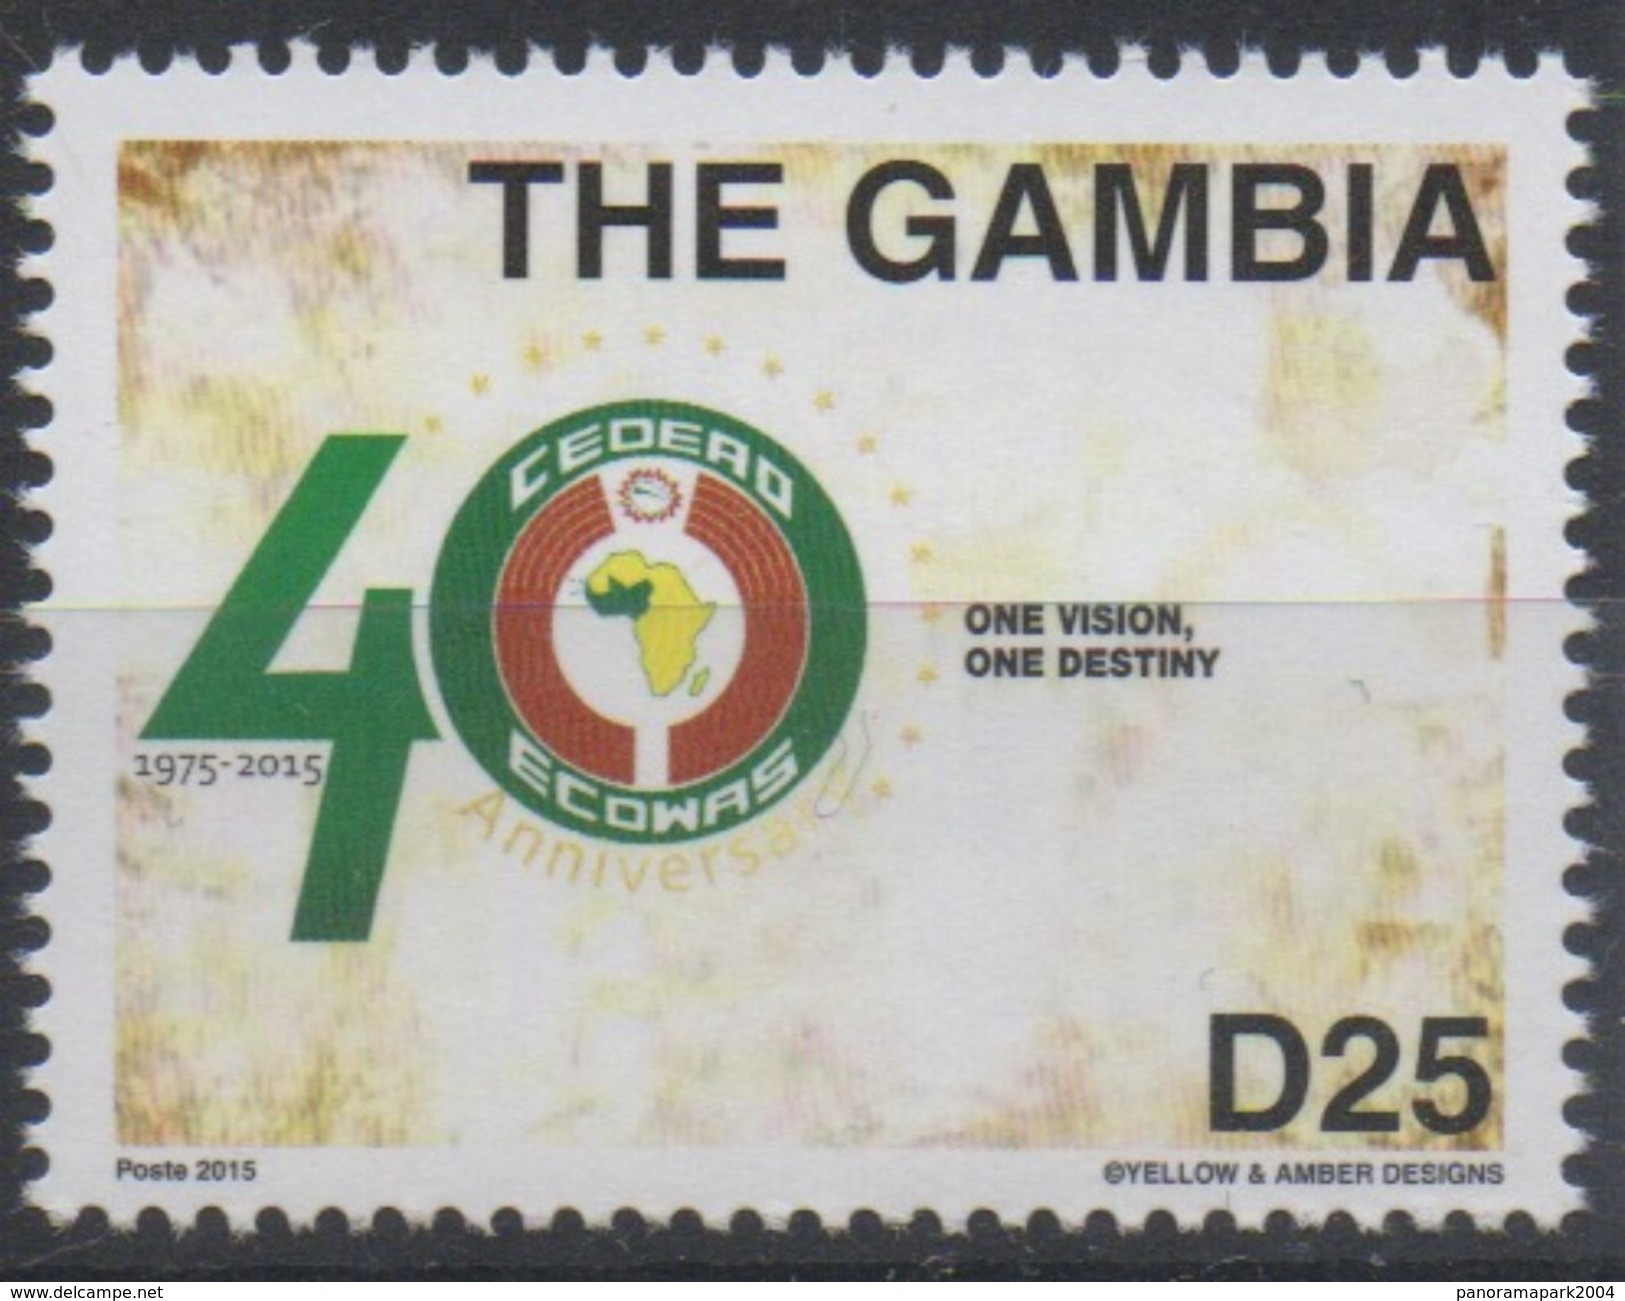 The Gambia Gambie 2015 Emission Commune Joint Issue CEDEAO ECOWAS 40 Ans 40 Years - Emisiones Comunes